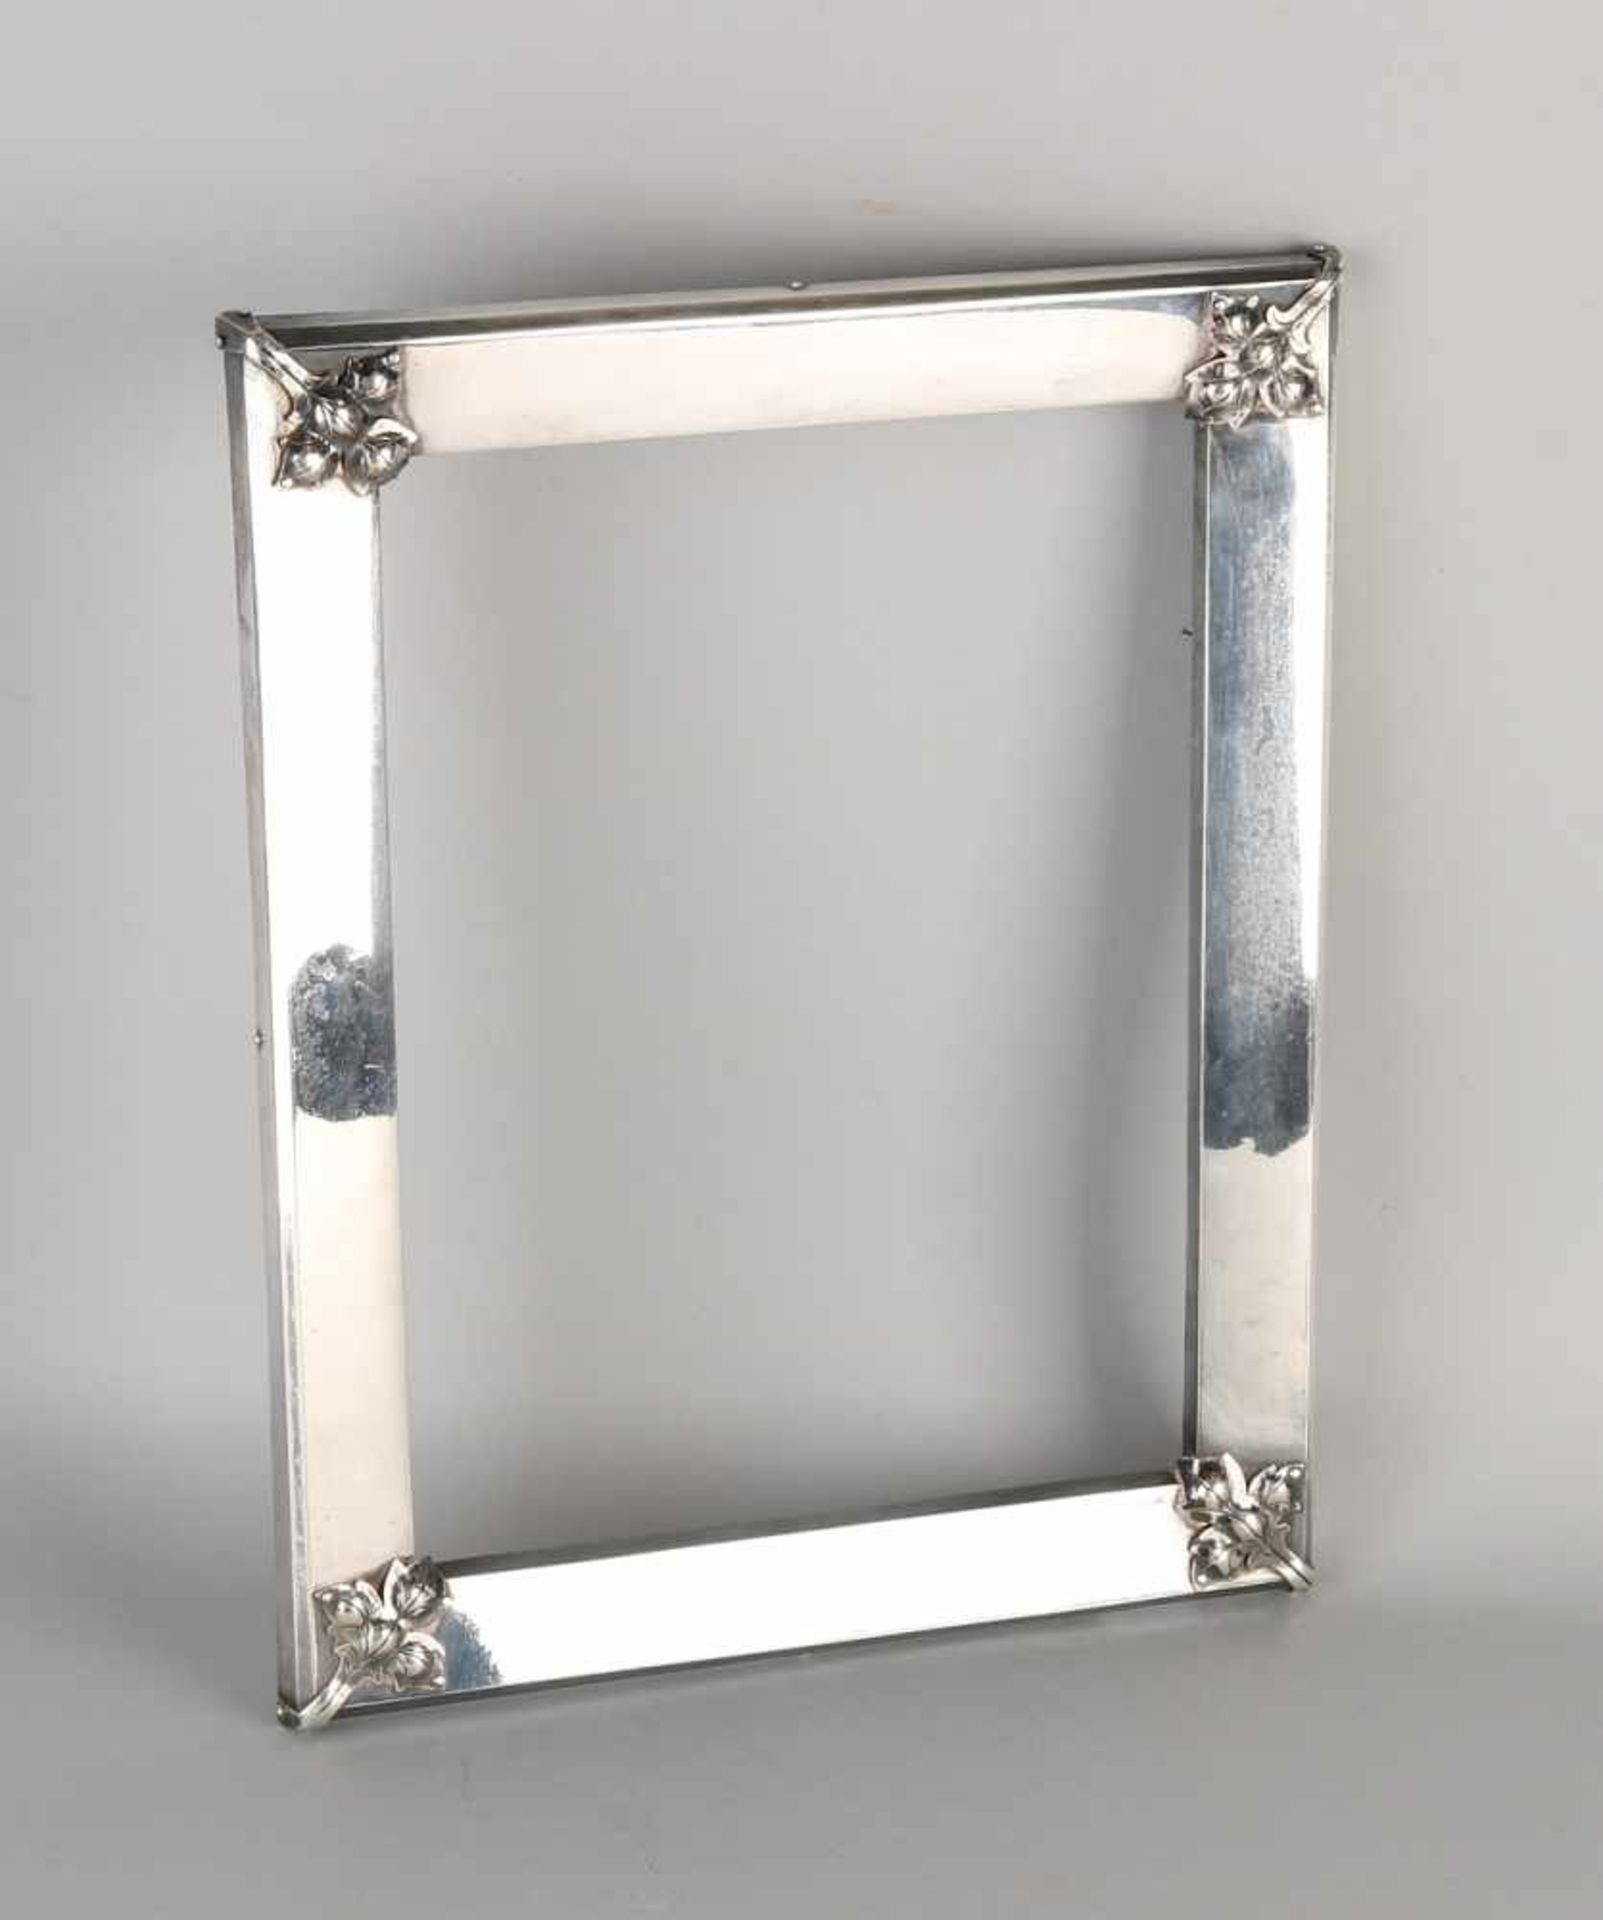 Big silver frame, 835/000, rectangular wide, 4cm, decorated with leaf decoration on the corners. The